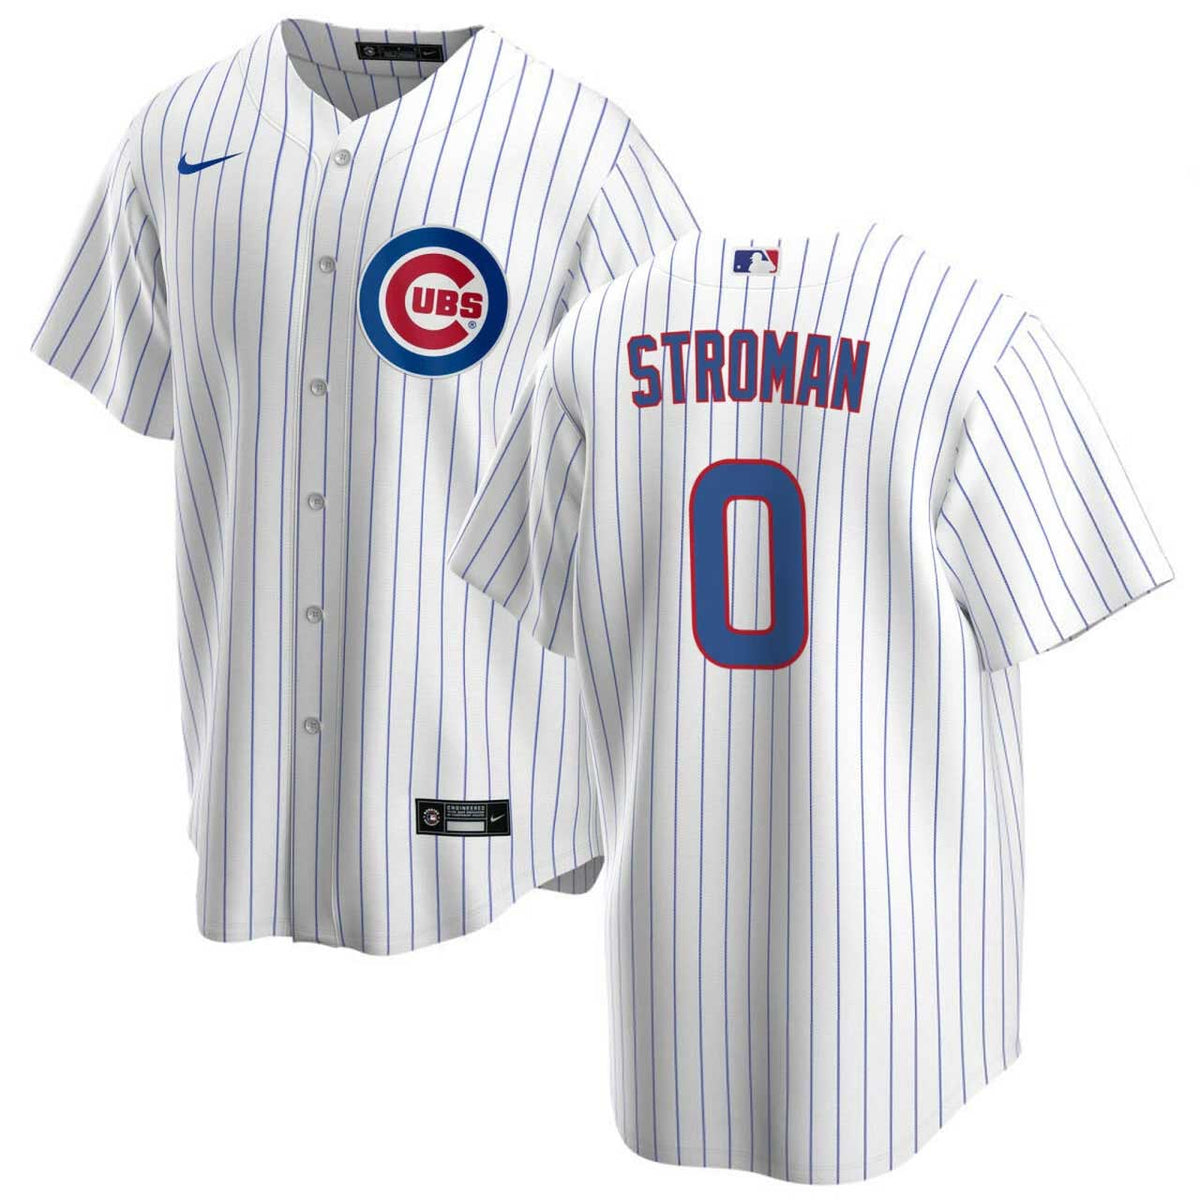  Chicago Cubs Jersey